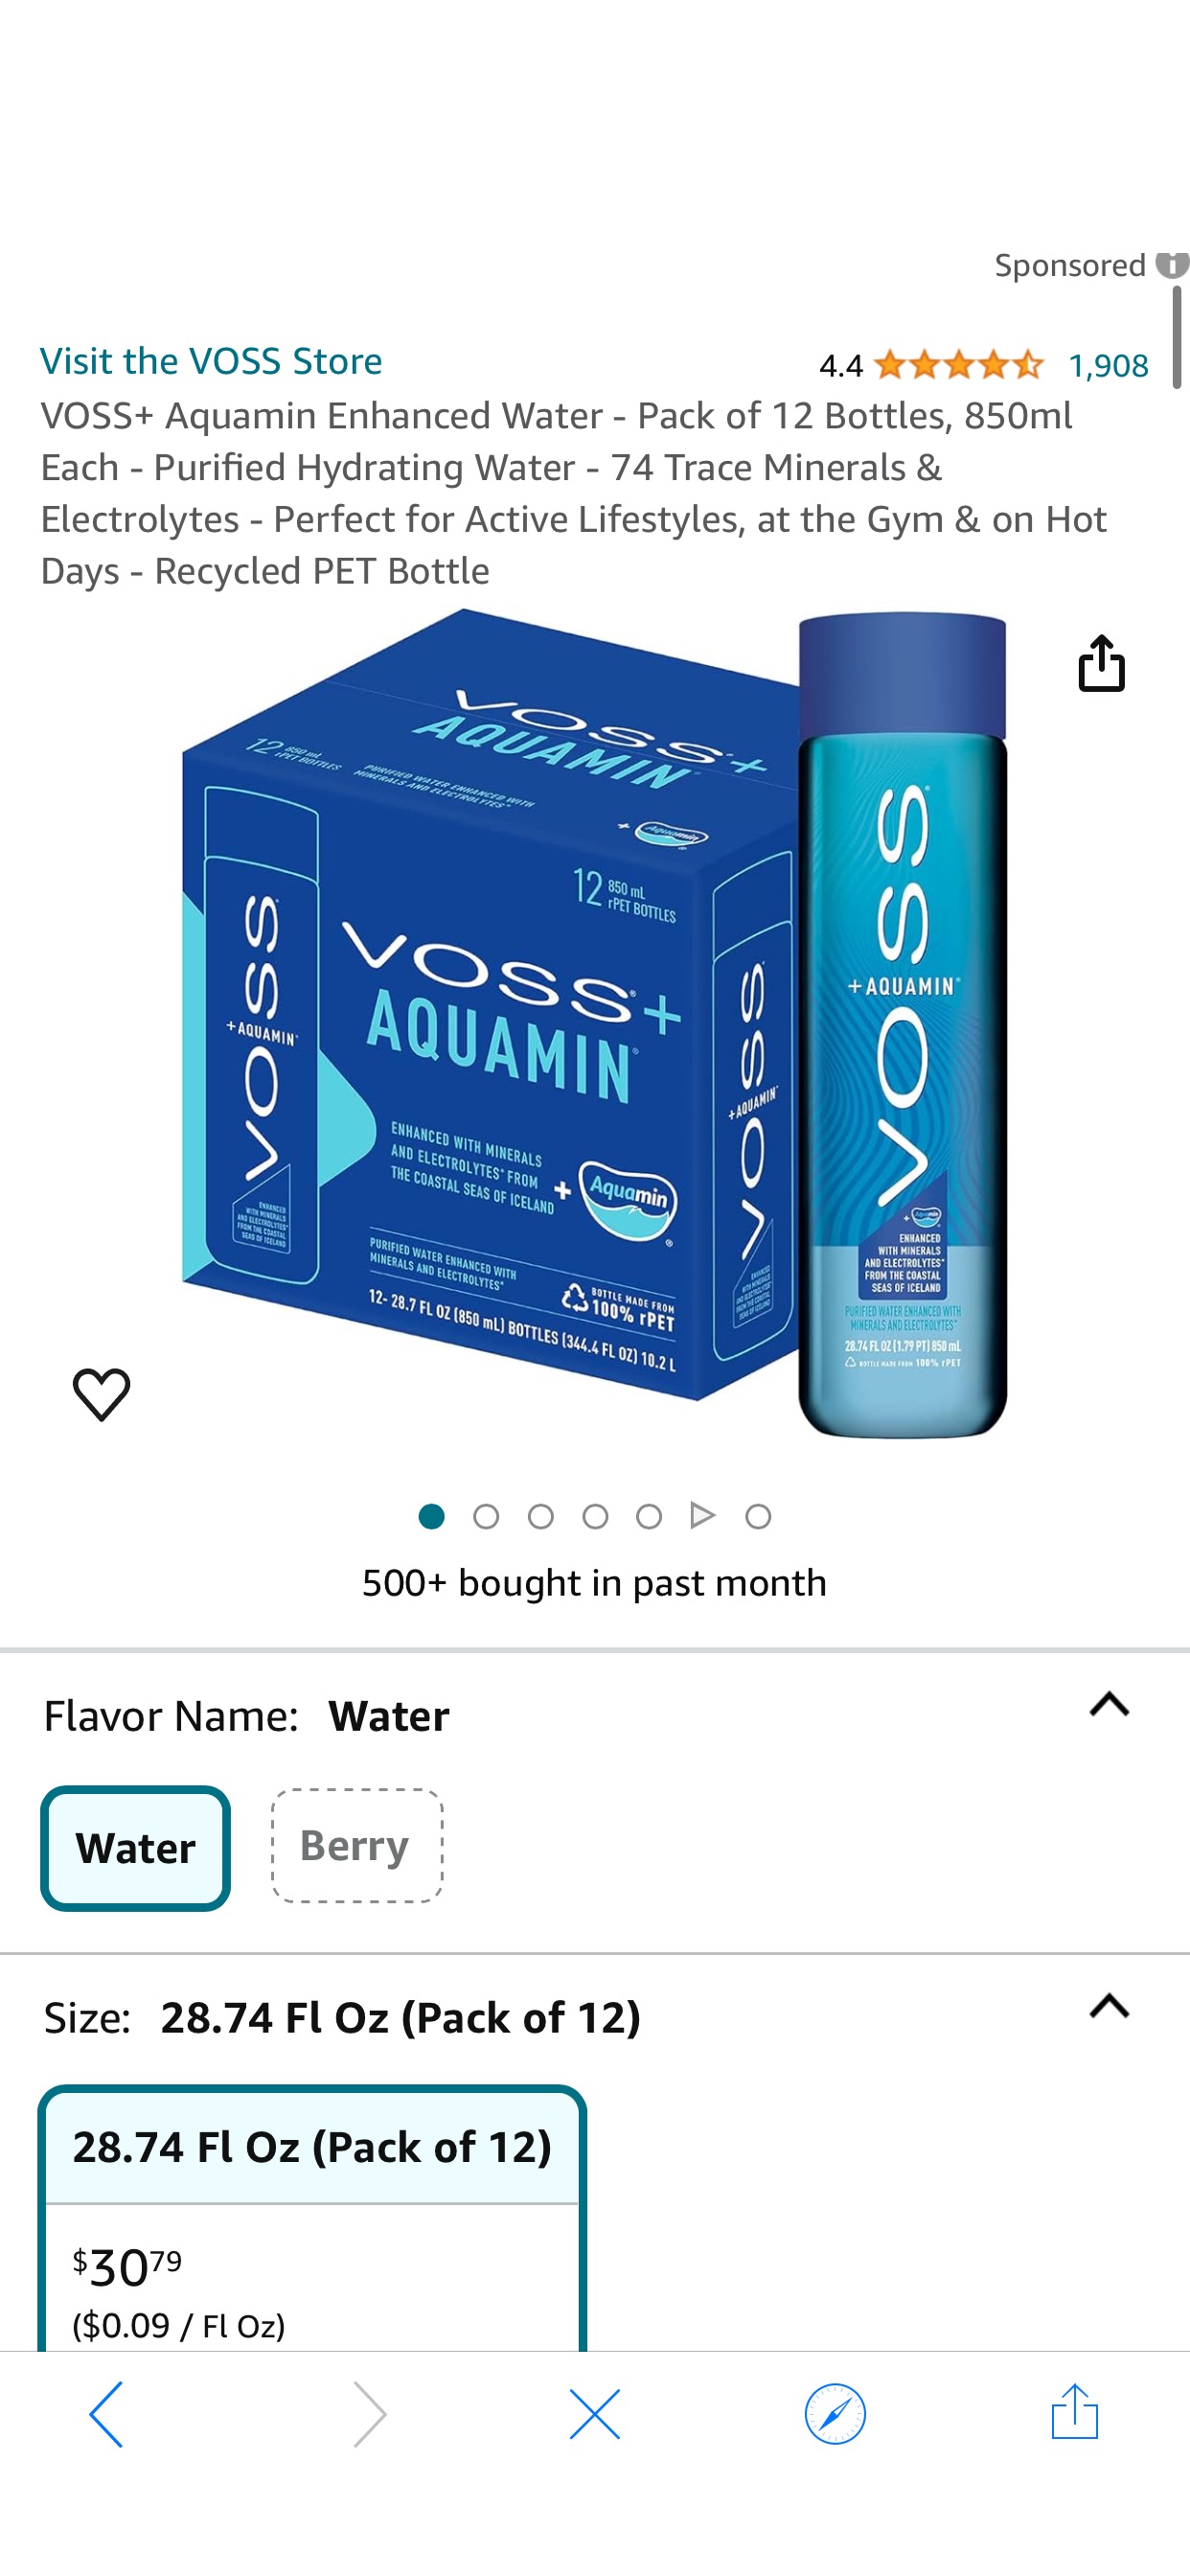 Amazon.com: VOSS+ Aquamin Enhanced Water - Pack of 12 Bottles, 850ml Each - Purified Hydrating Water - 74 Trace Minerals & Electrolytes - Perfect for Active Lifestyles, at the Gym & on Hot Days - Recy